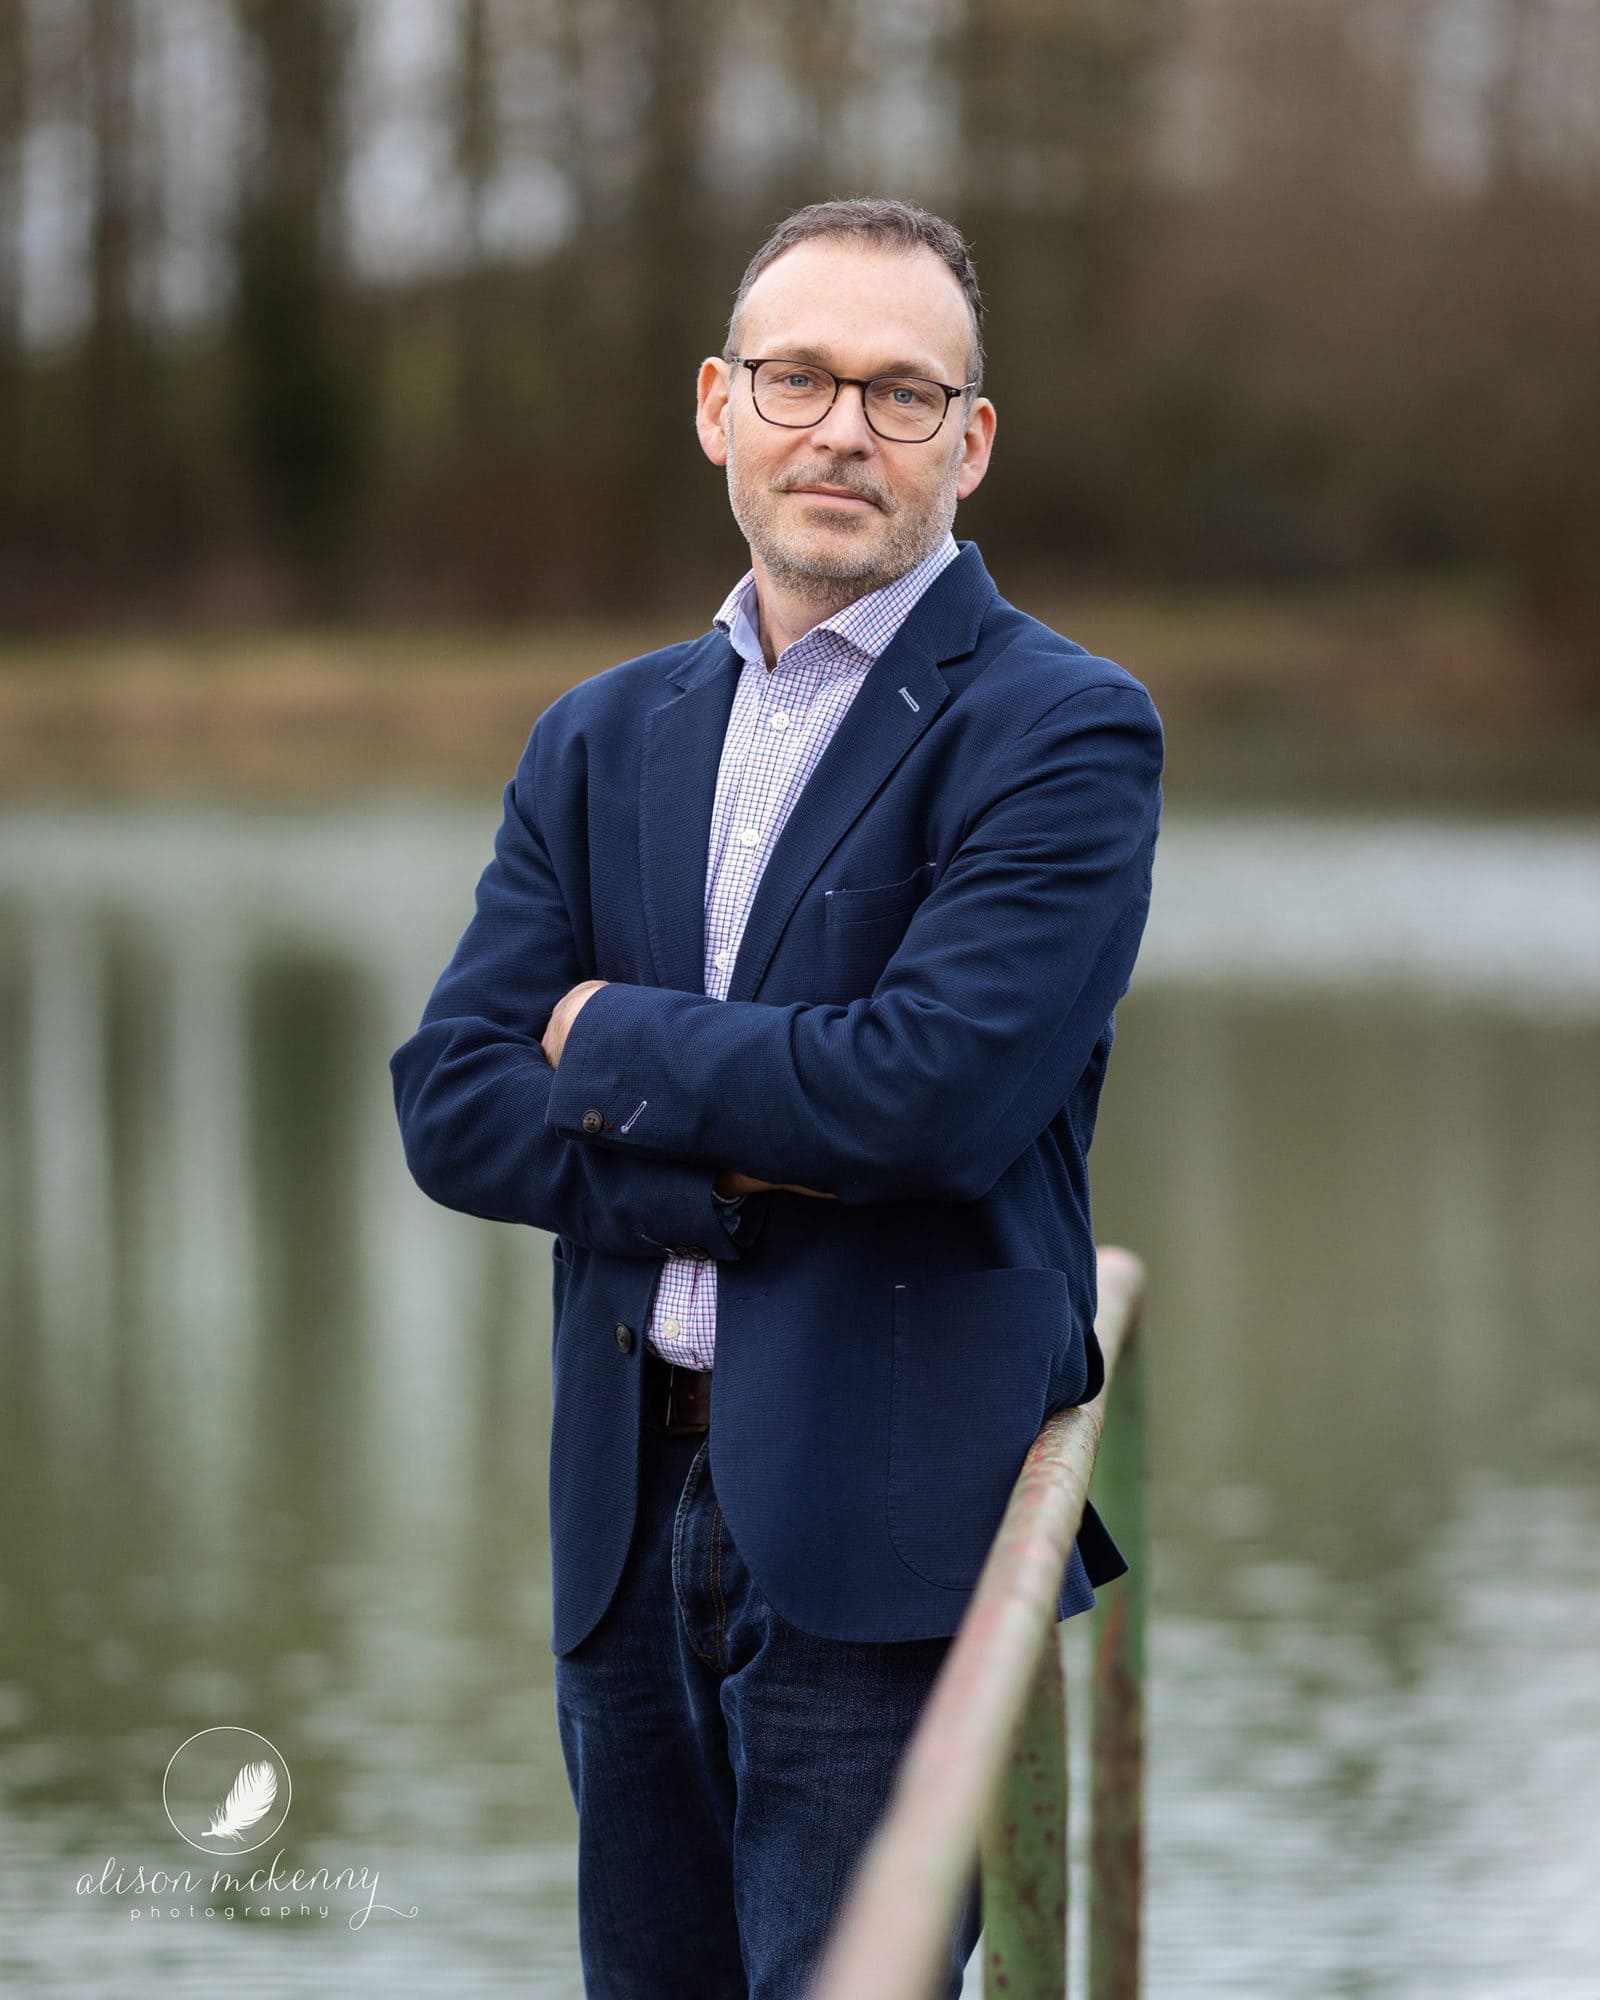 Man in a suit jacket and jeans standing next to a lake in a rural setting during a Personal Branding Photoshoot in Suffolk